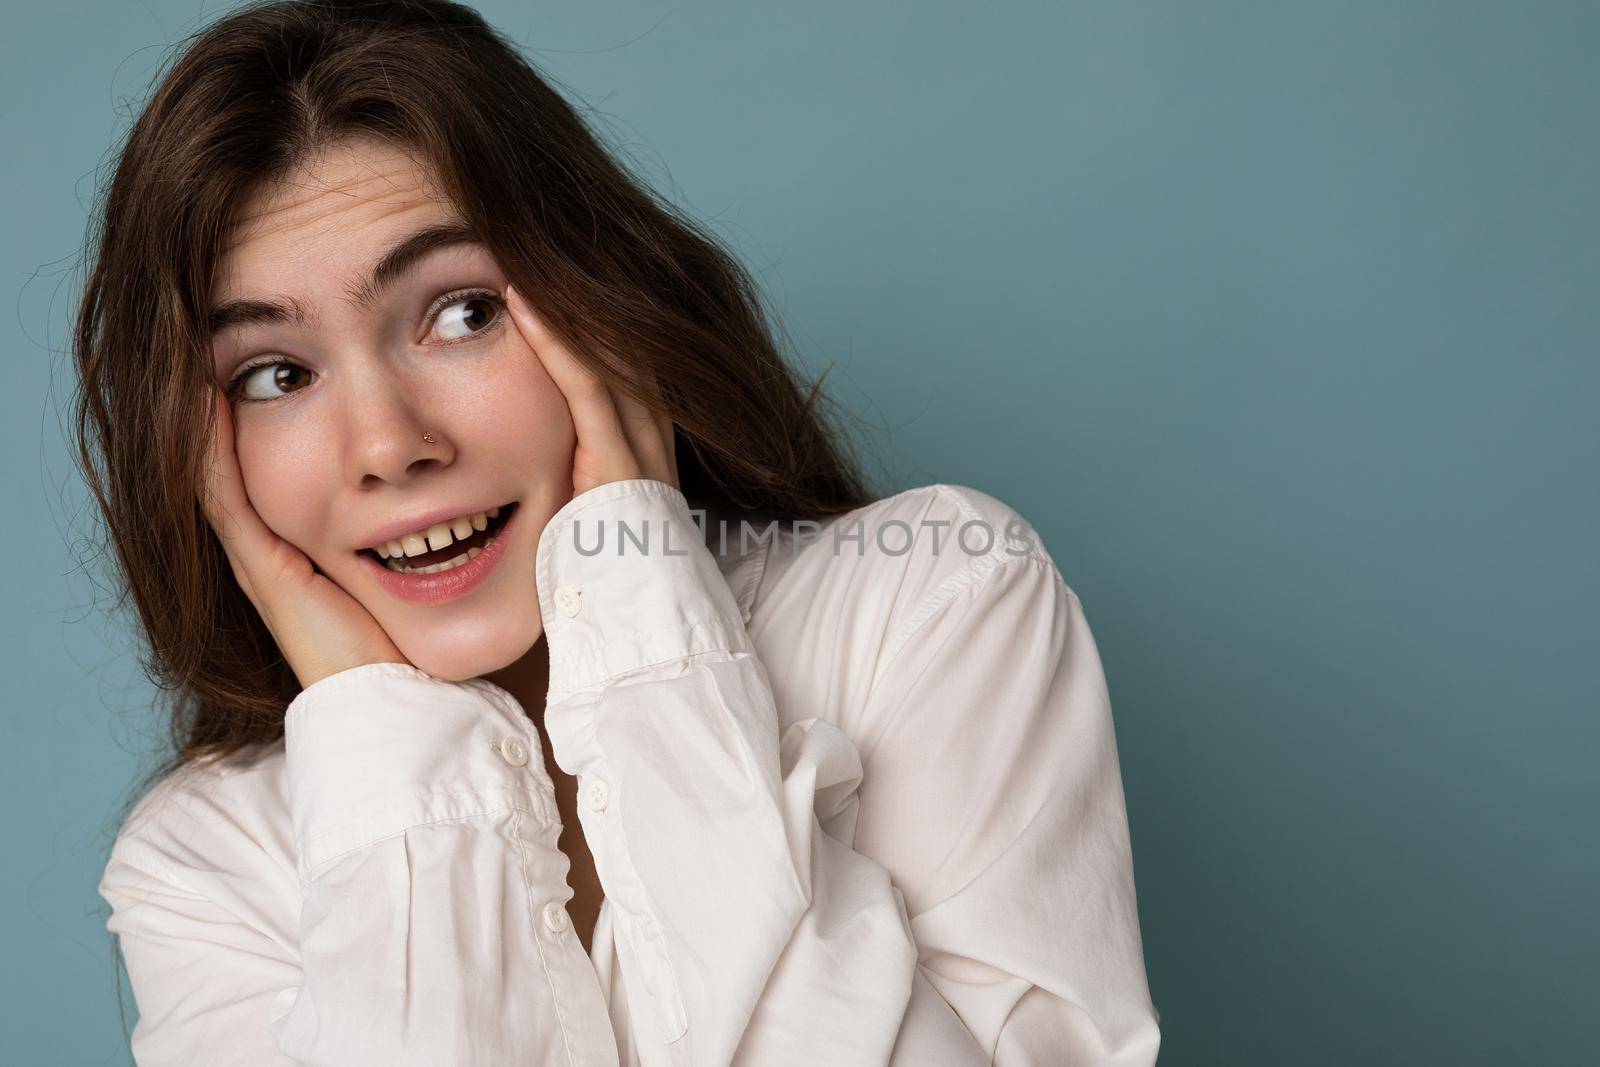 Attractive funny amusing joyful cute nice adorable tender young curly brunette woman wearing white shirt isolated on blue background with copy space.